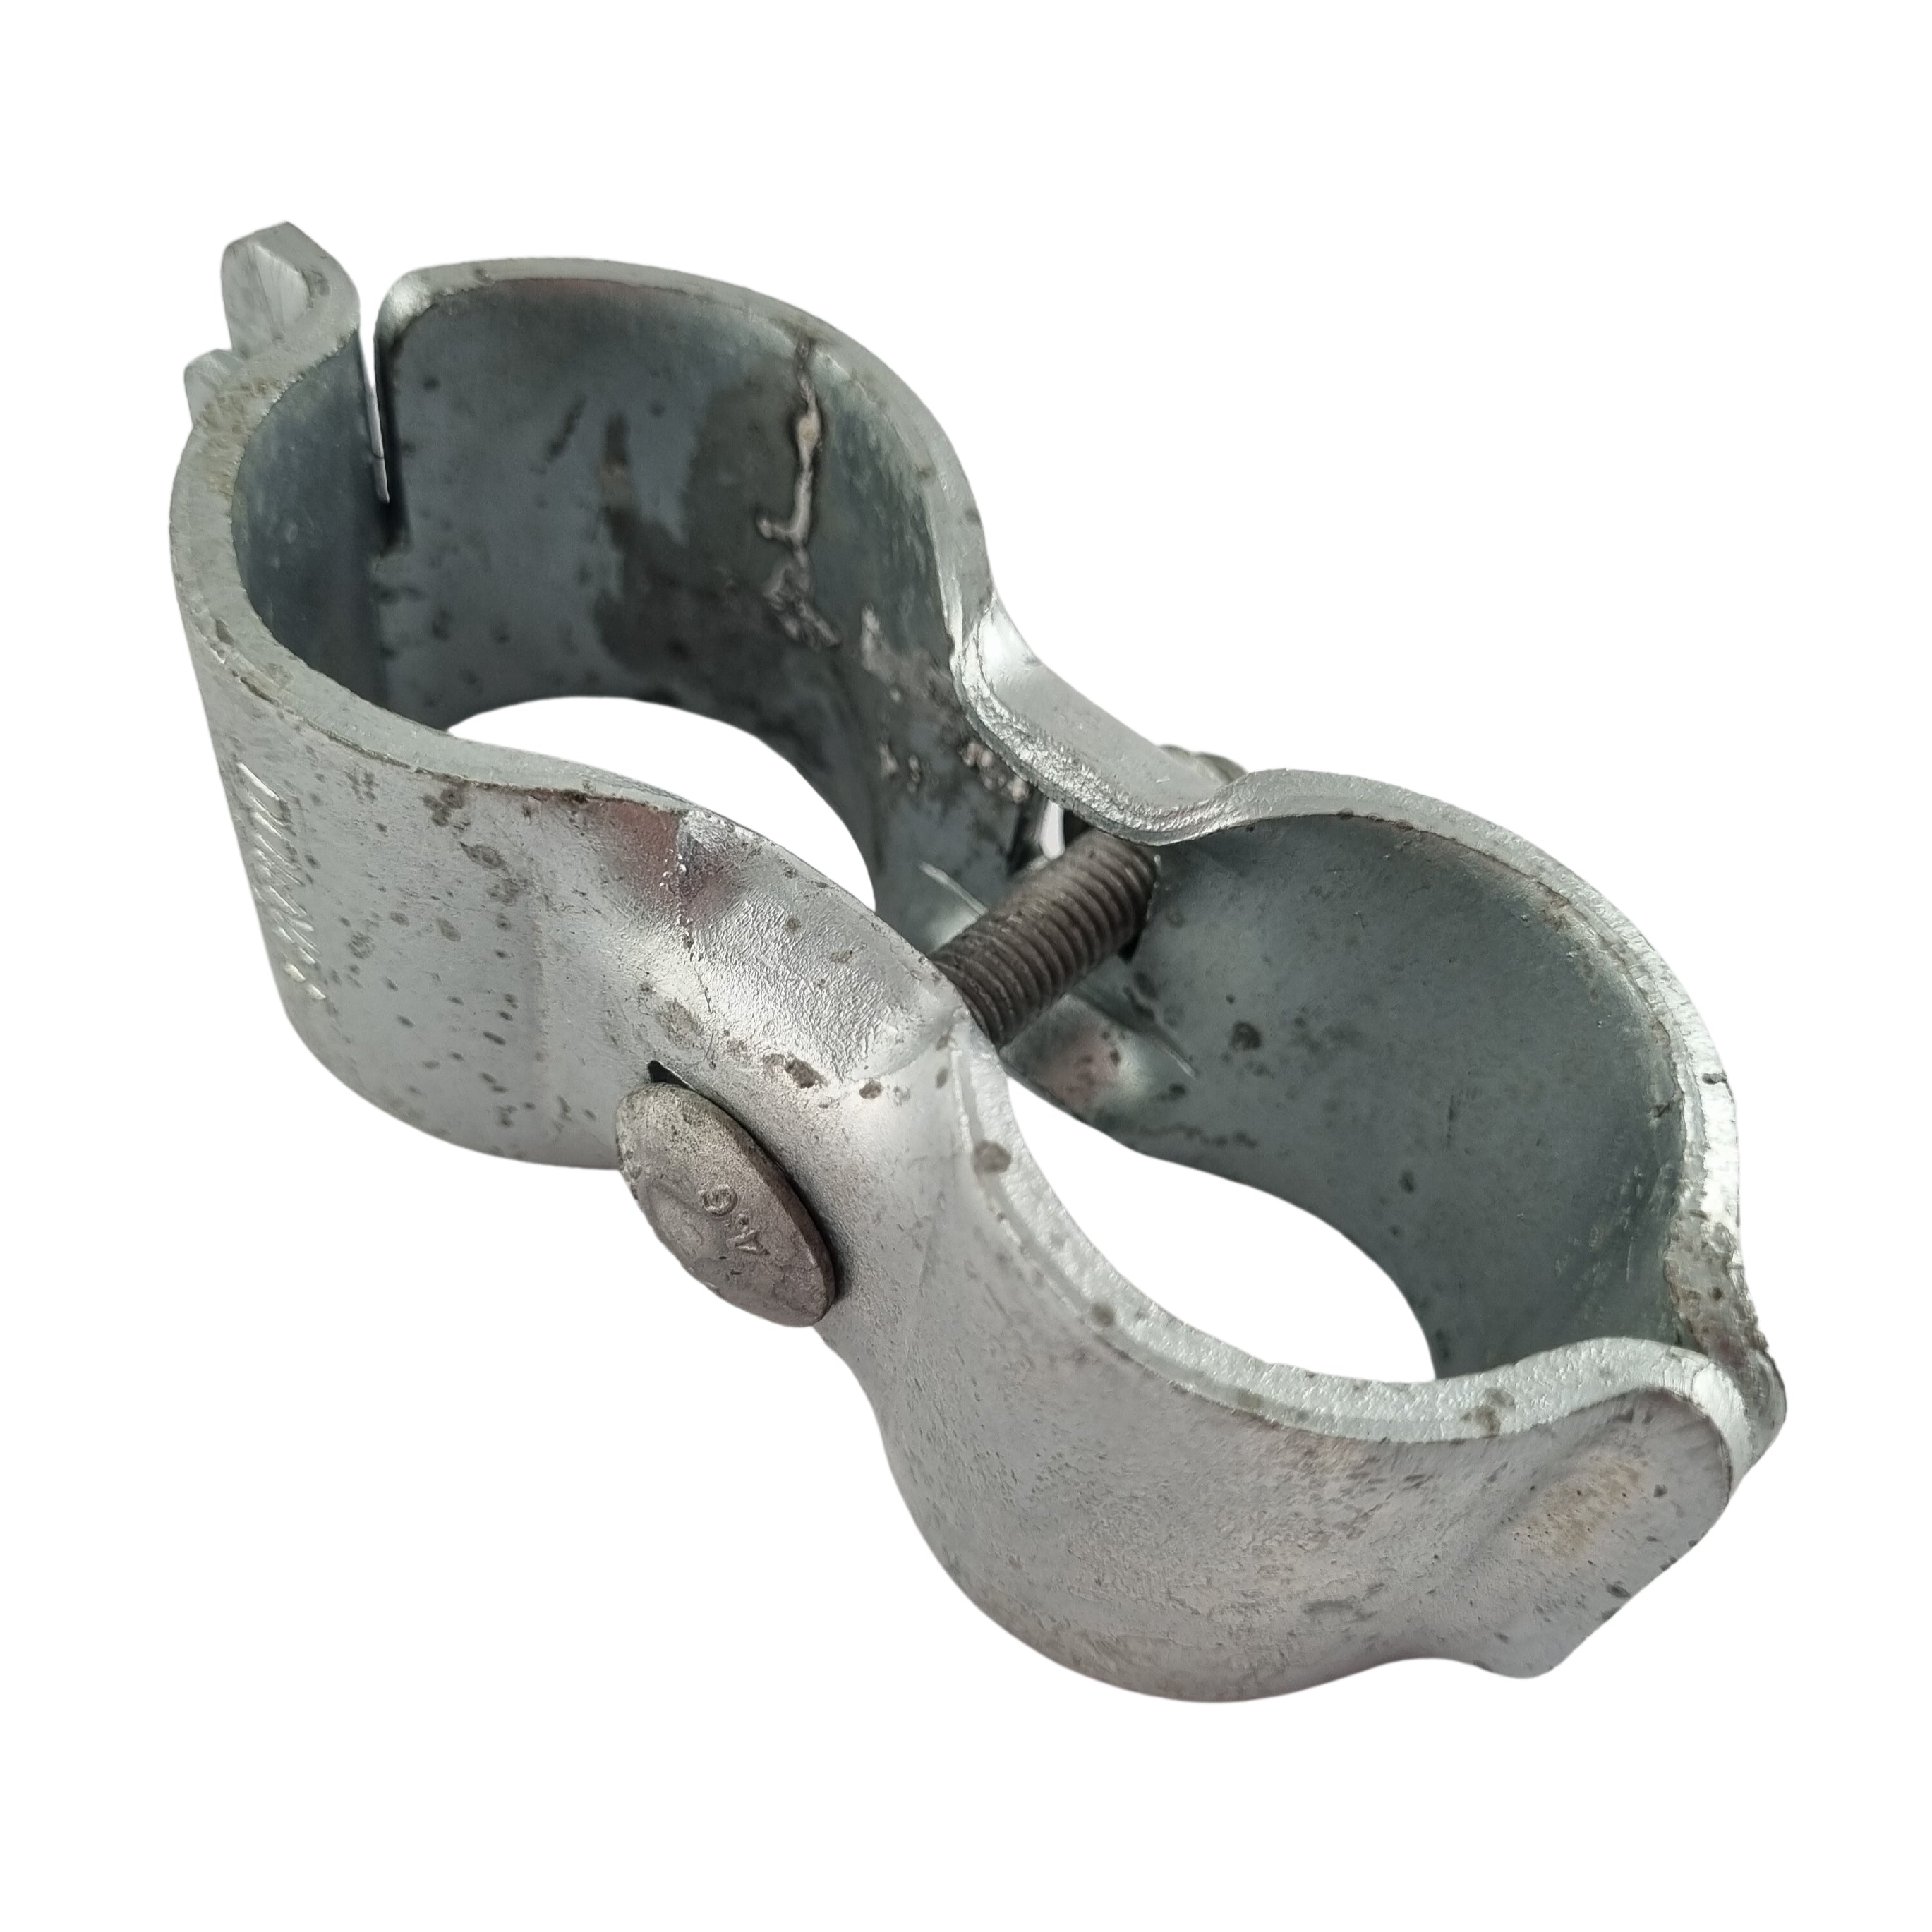 Two Part Interlocking Hinge - Galvanised. Various sizes. Shop Fence & Gate Fittings online at chain.com.au. Shipping Australia wide.